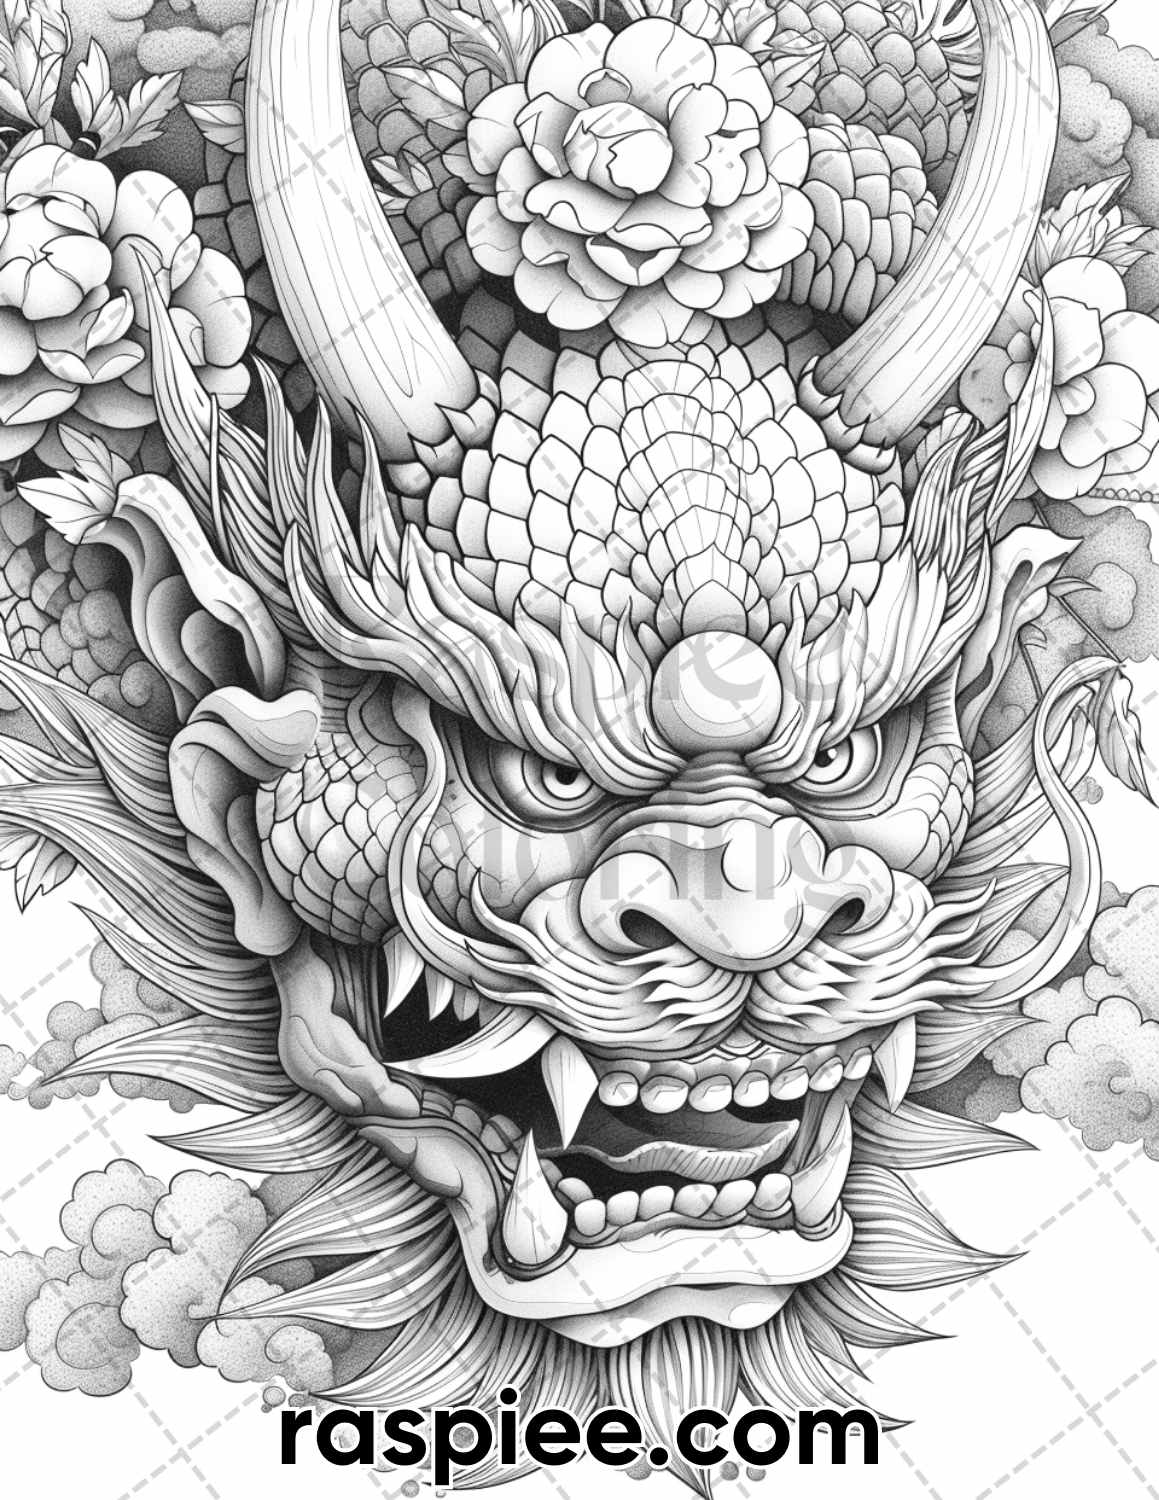 adult coloring pages, adult coloring sheets, adult coloring book pdf, adult coloring book printable, grayscale coloring pages, grayscale coloring books, tattoo coloring pages for adults, tattoo coloring book, grayscale illustration, traditional japanese tattoos coloring pages